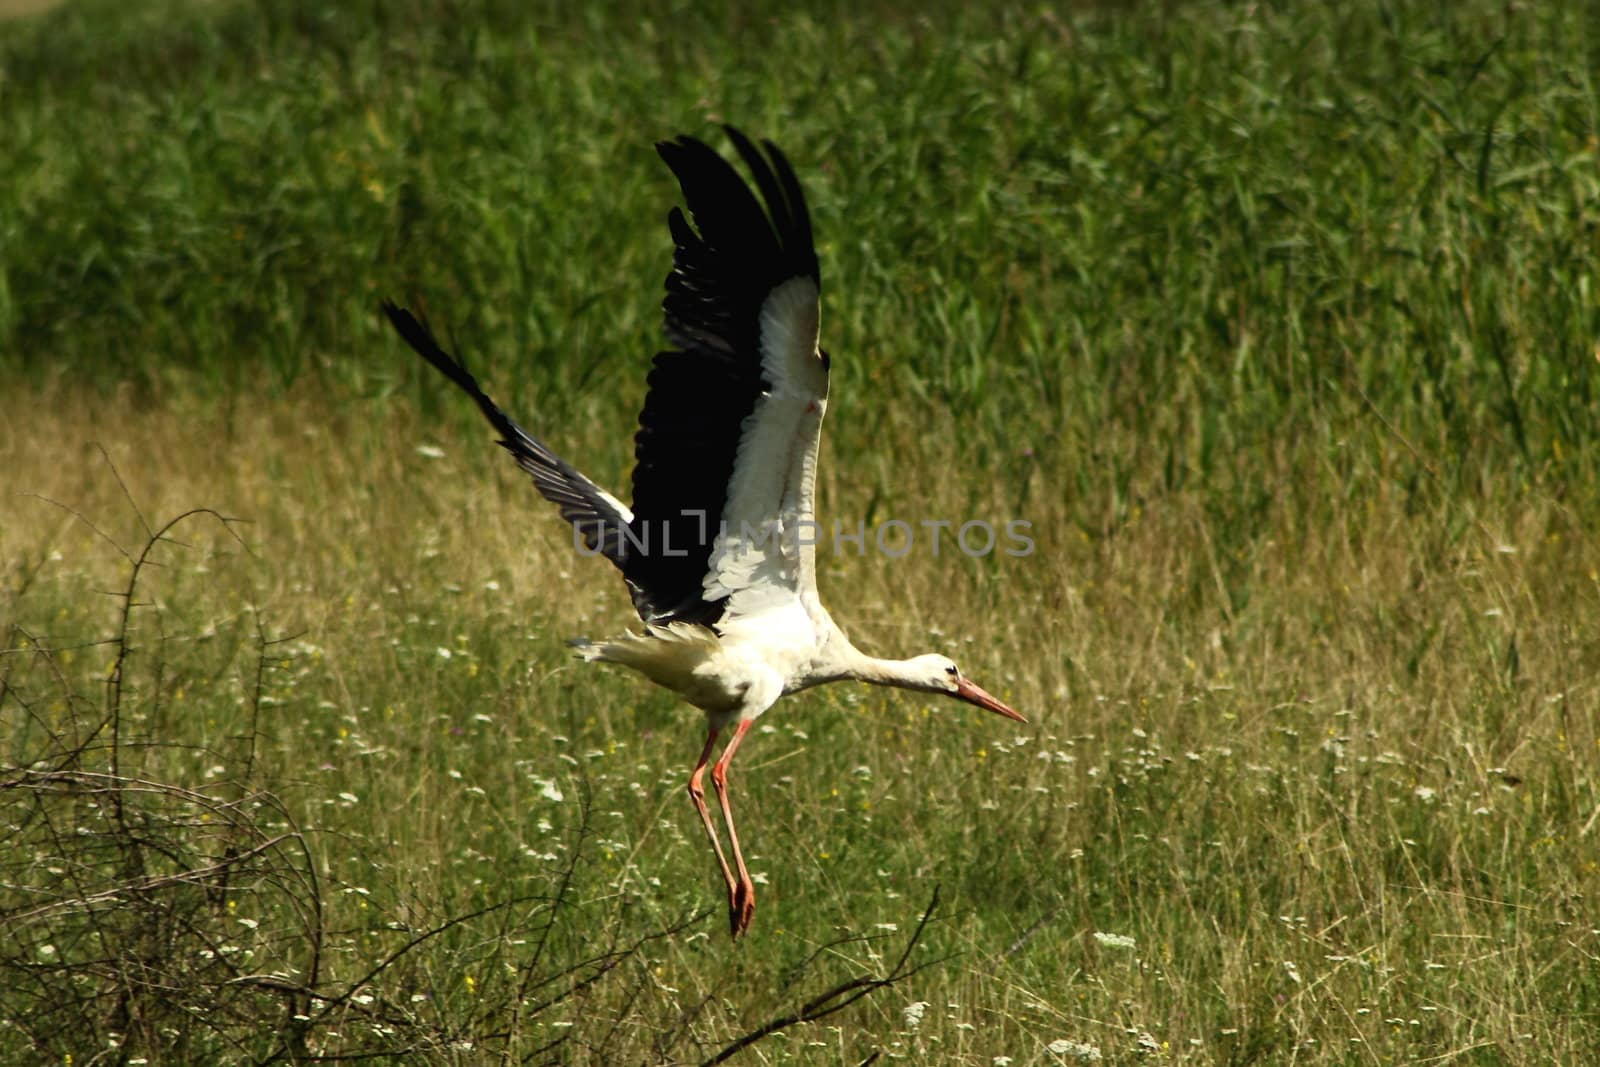 a stork getting off the ground as it spotted us